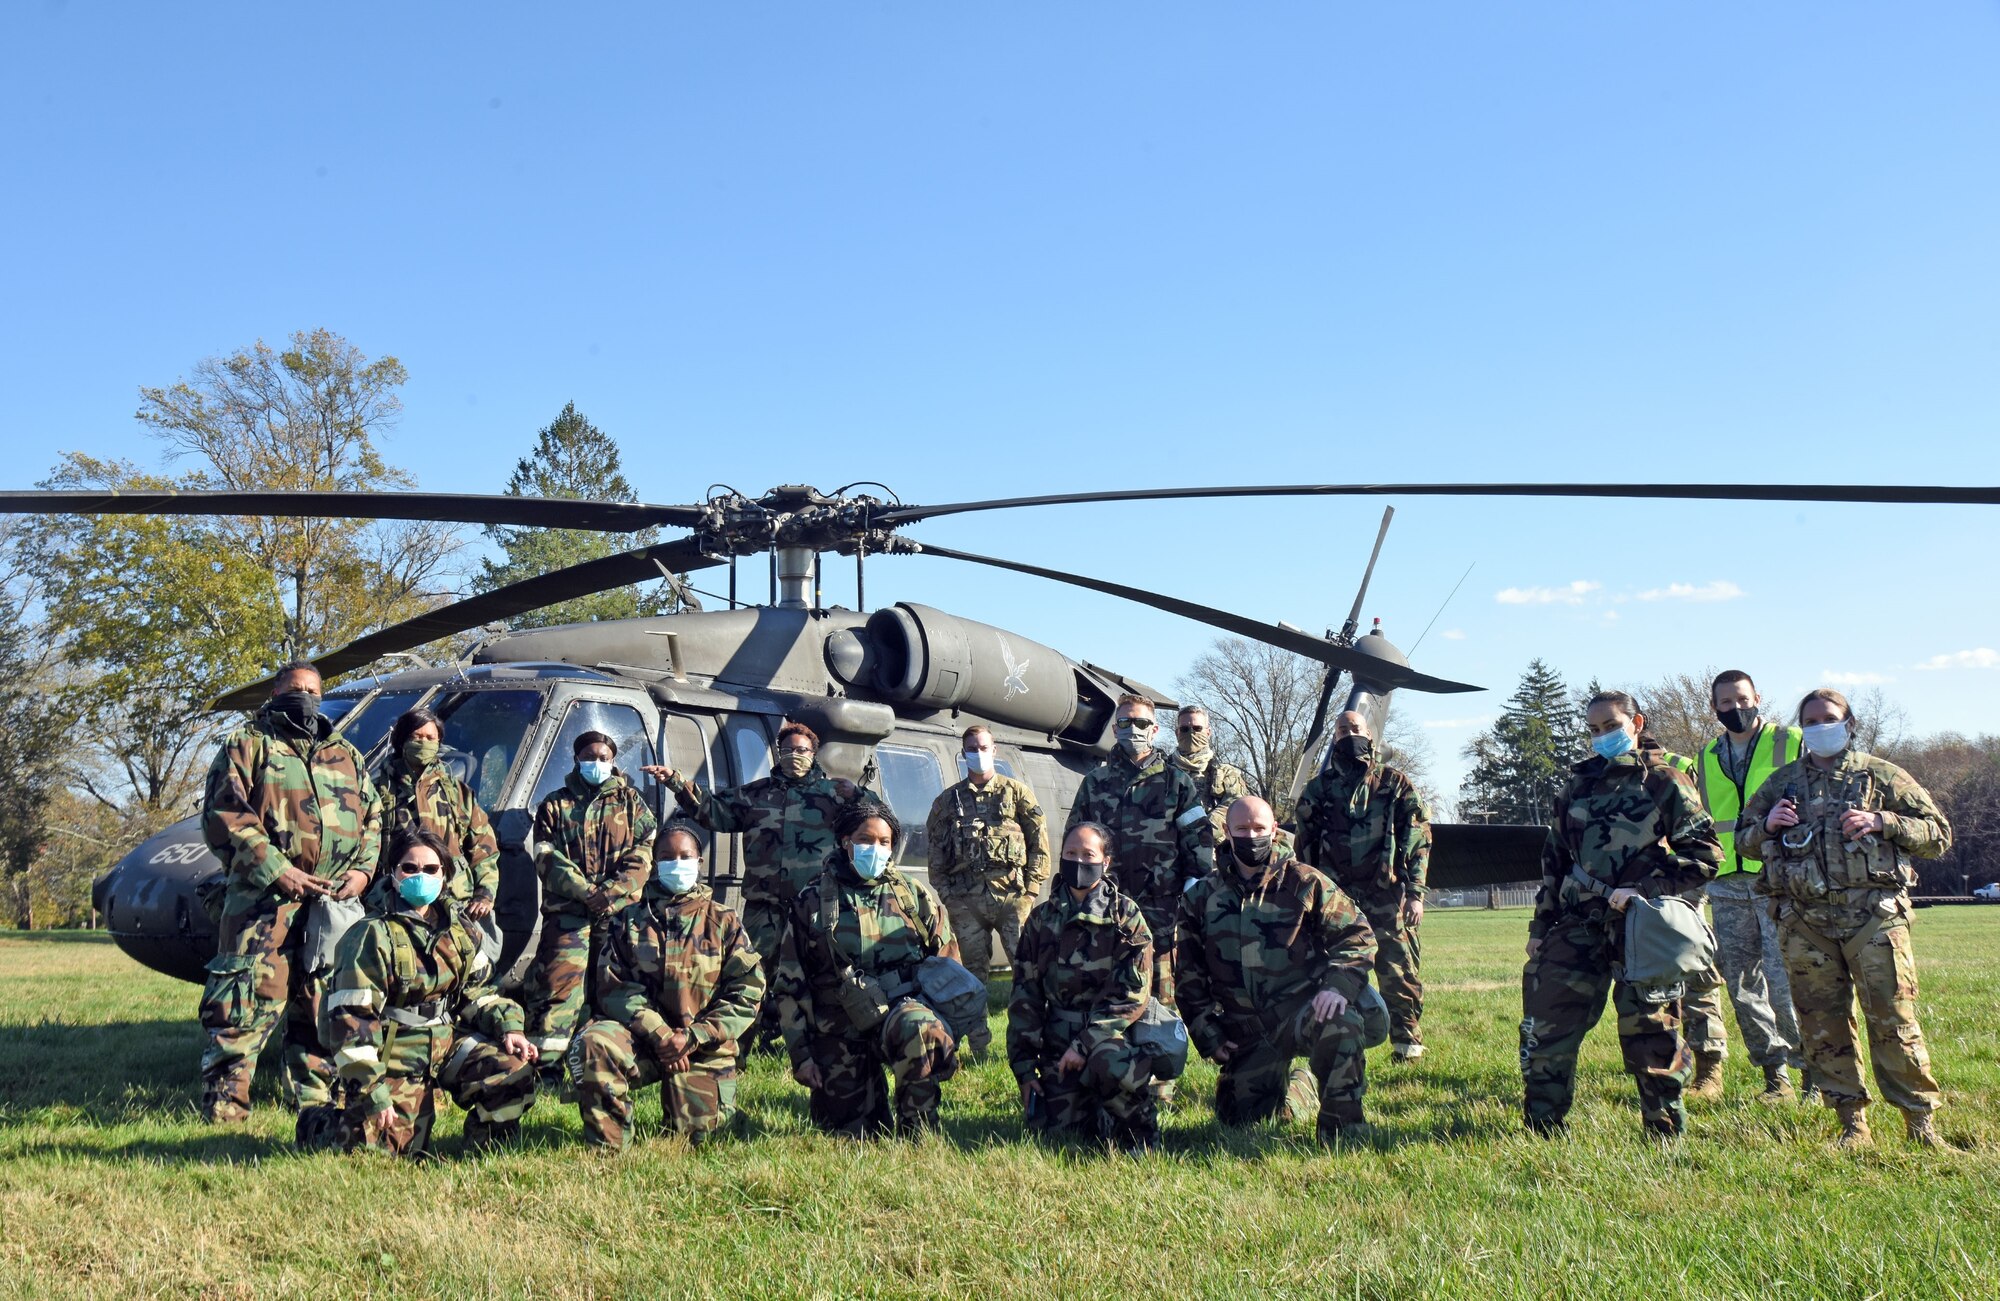 Participants pose in front of a UH-60 Blackhawk helicopter before initiating MEDEVAC tactical combat casualty care training at the Babe Ruth field, Nov. 16, 2020 on Joint Base McGuire-Dix-Lakehurst, N.J. The objectives of MEDEVAC TCCC are to treat casualties, prevent additional casualties and mission completion. (U.S. Air Force photo by Daniel Barney)